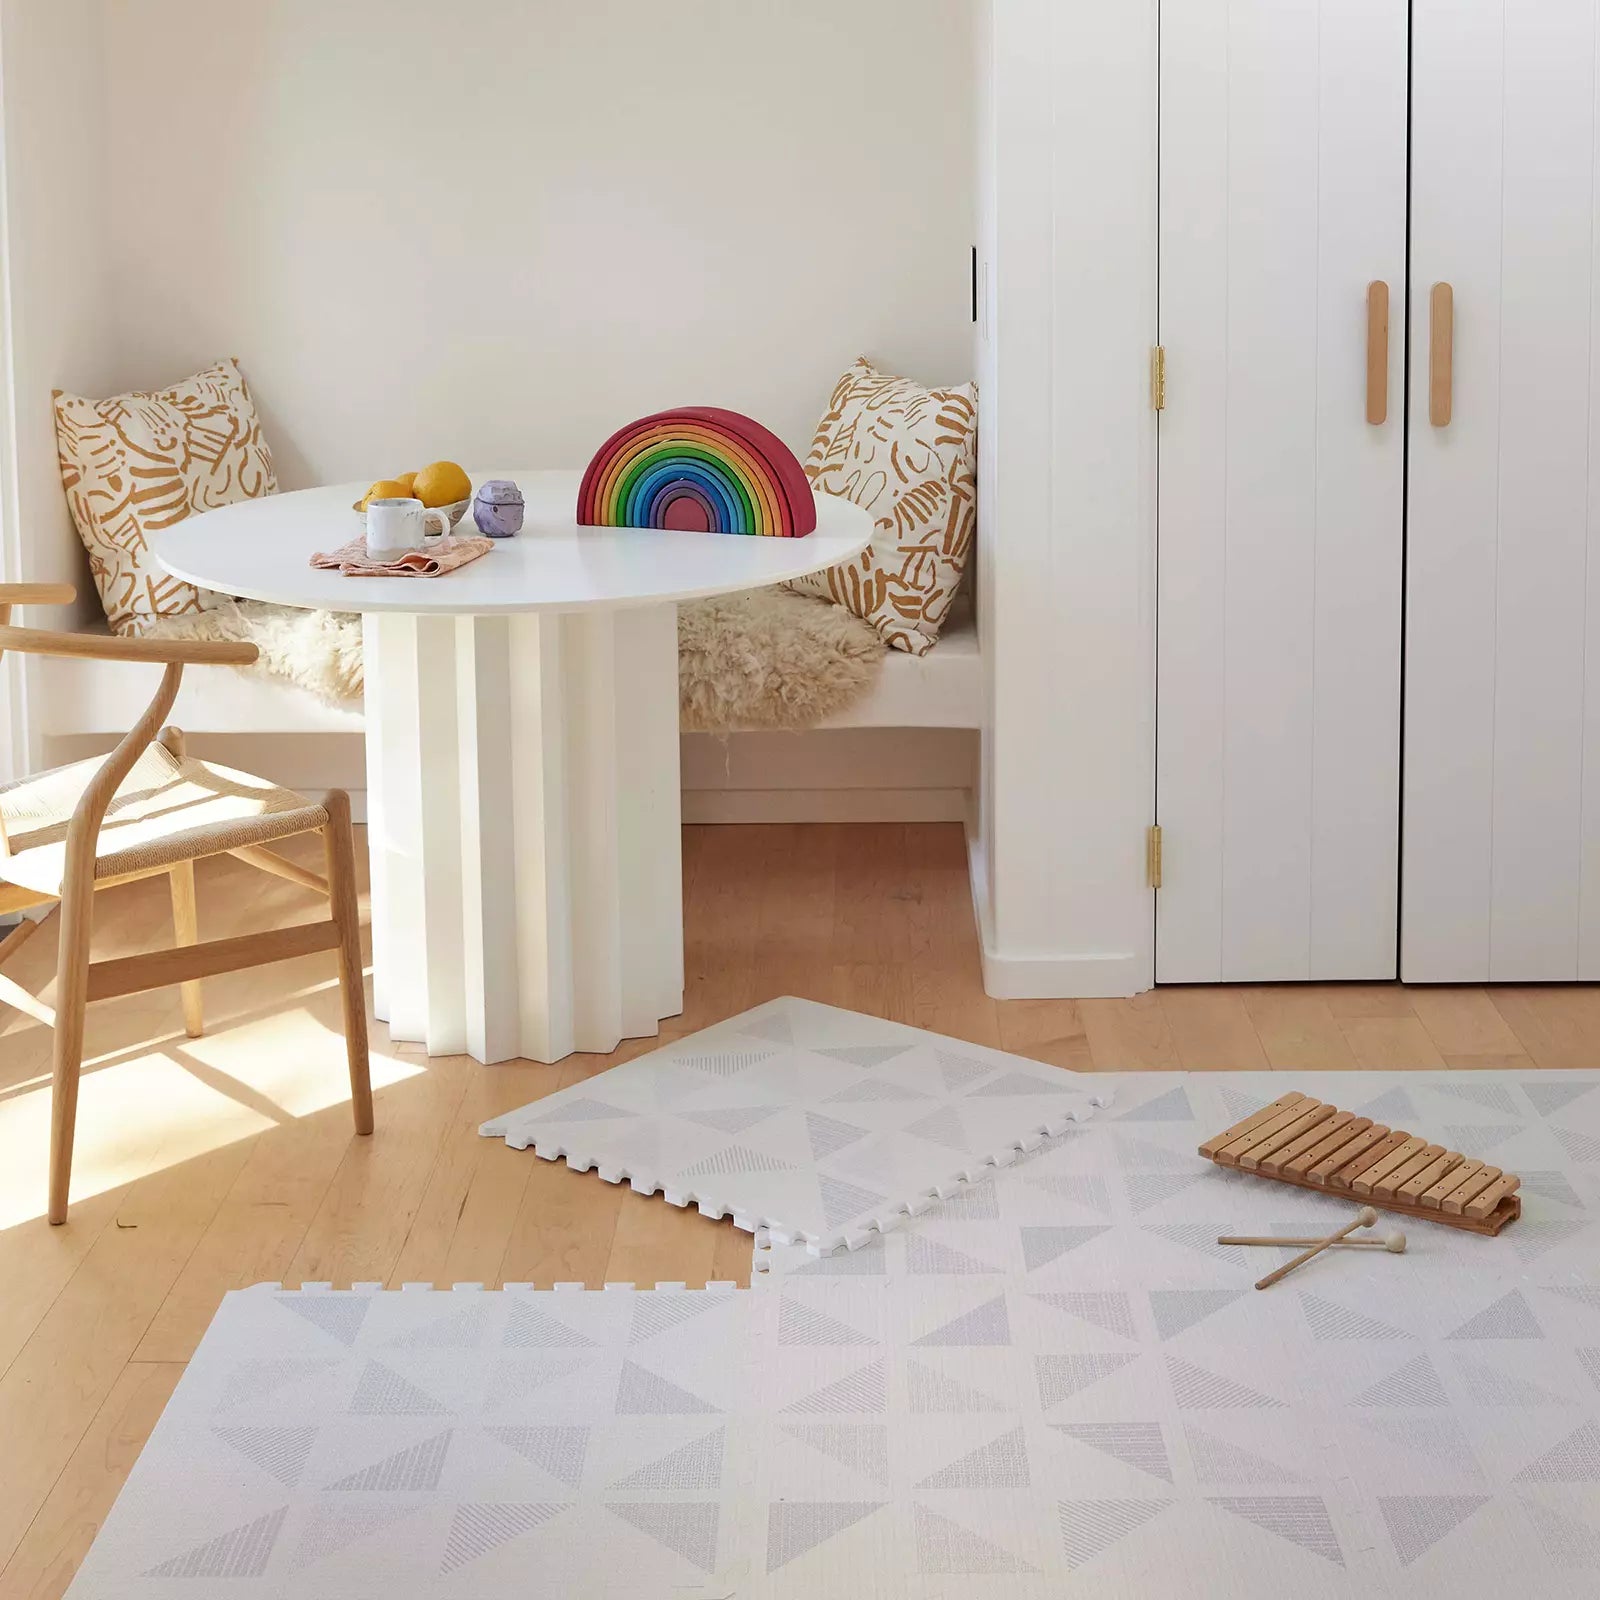 gallery terrazzo cream minimal geometric play mat shown in play room with xylophone on the mat and 1 tile exposed